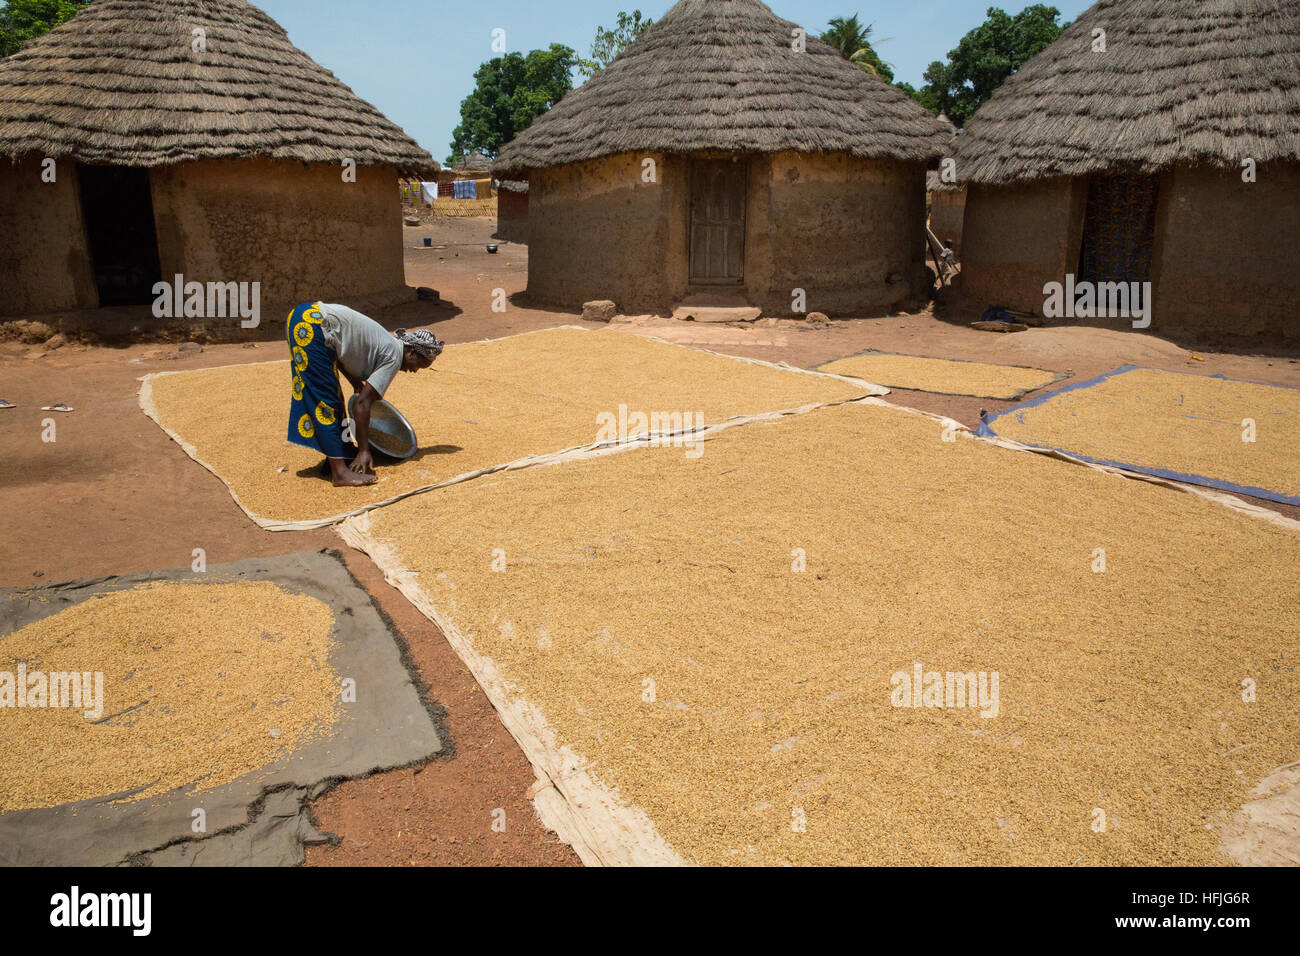 Koumban village, Guinea, 2nd May 2015; Fanta Diakité is drying paddy rice under the sun after cooking it. Stock Photo